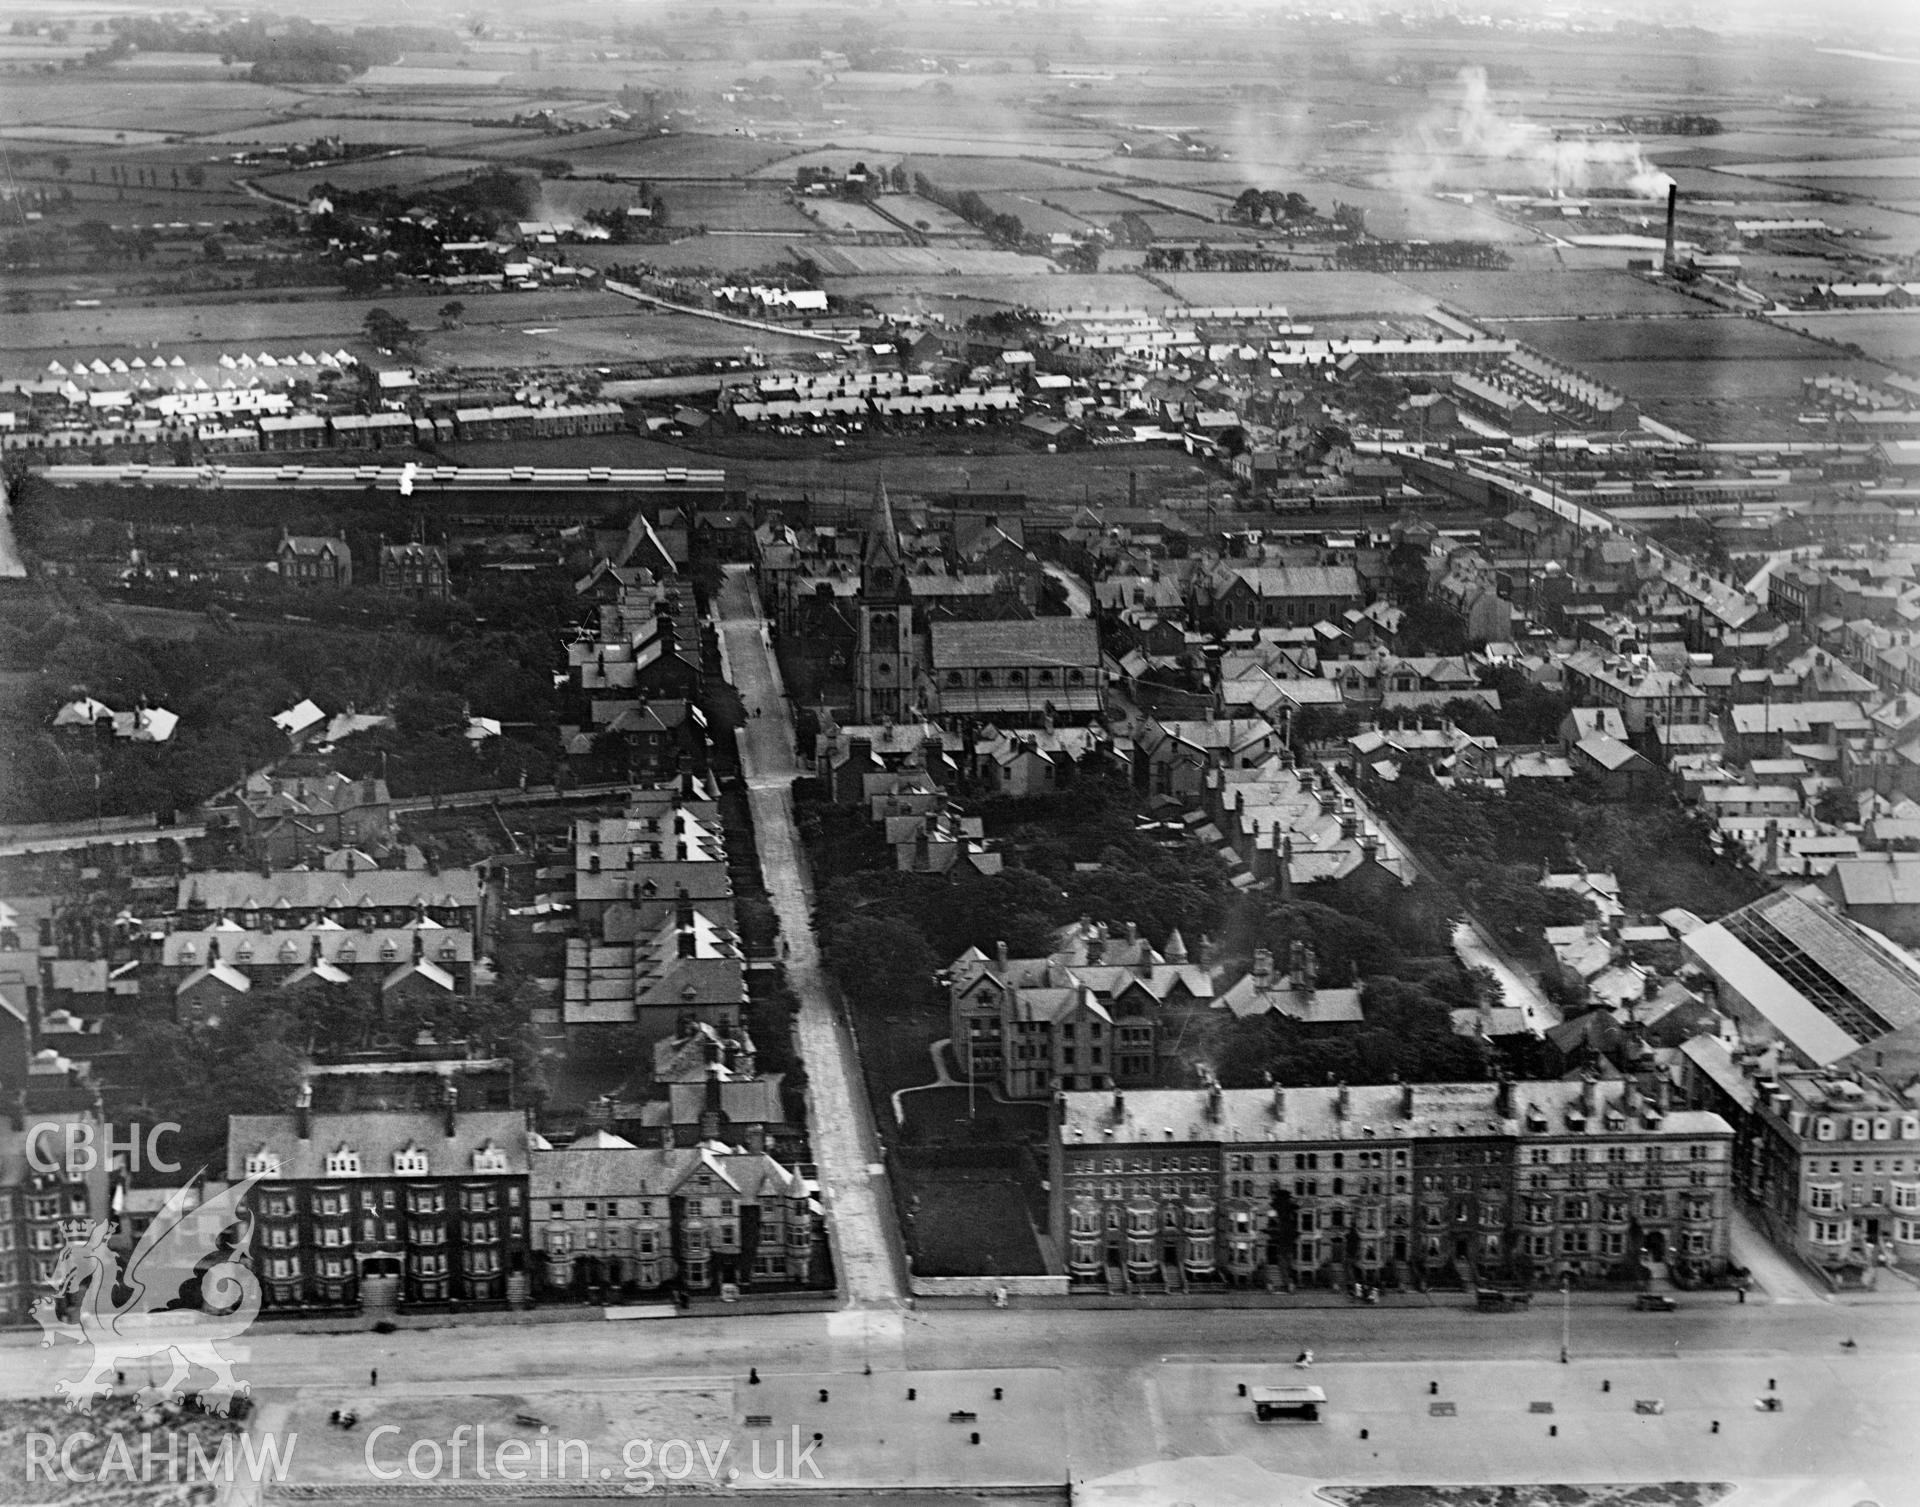 View of Rhyl showing town, oblique aerial view. 5?x4? black and white glass plate negative.